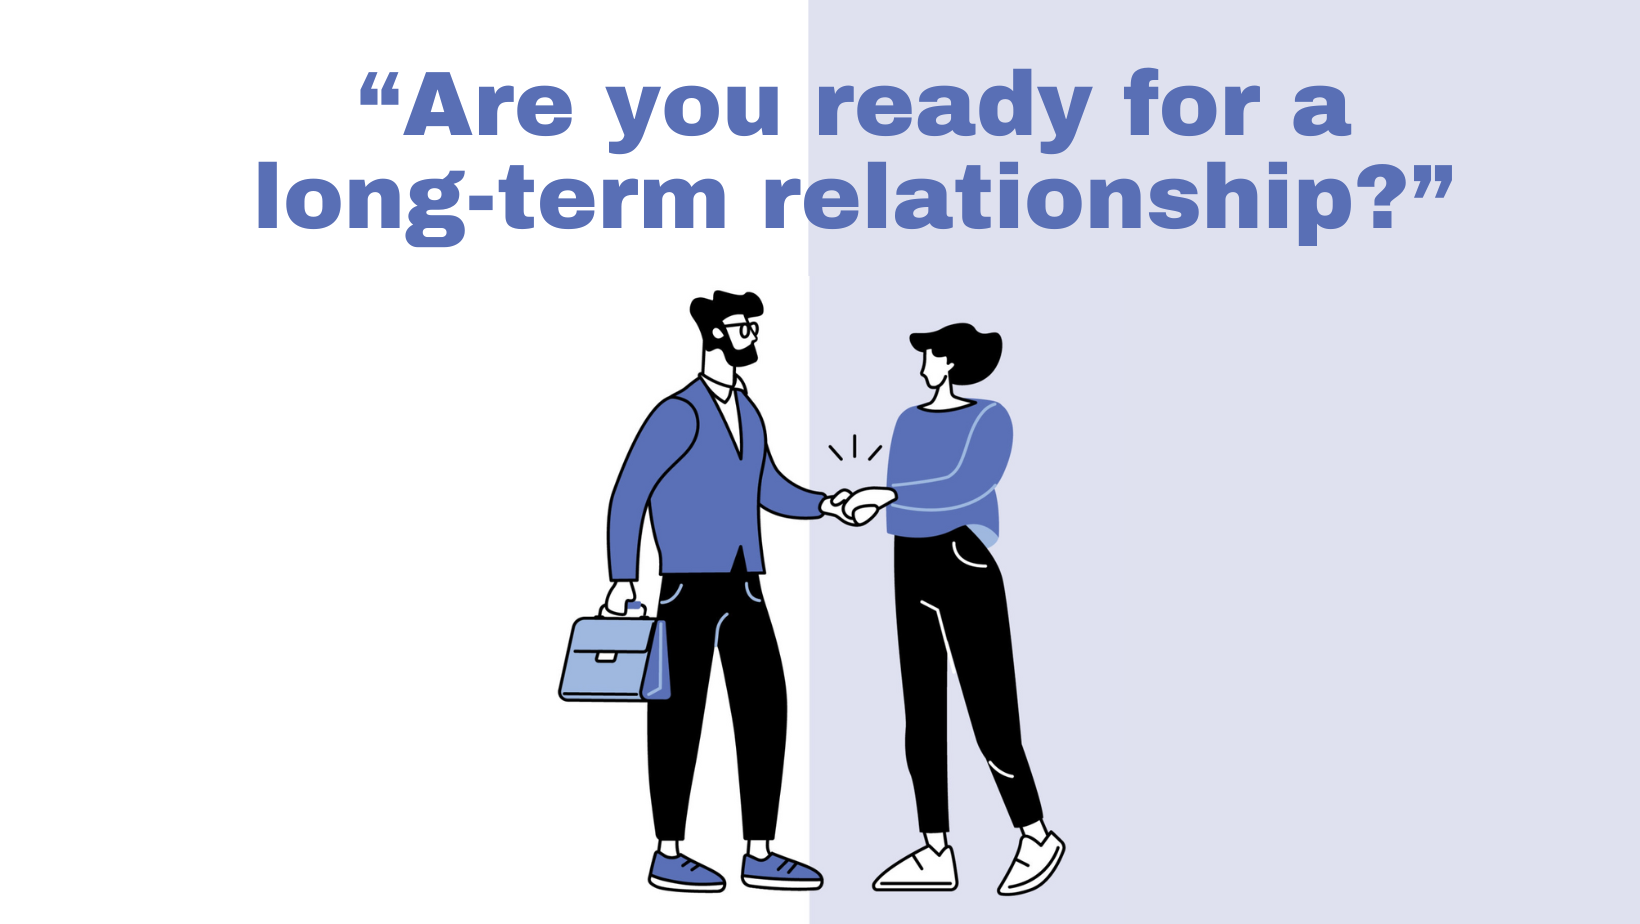 Are you ready for a long-term relationship?